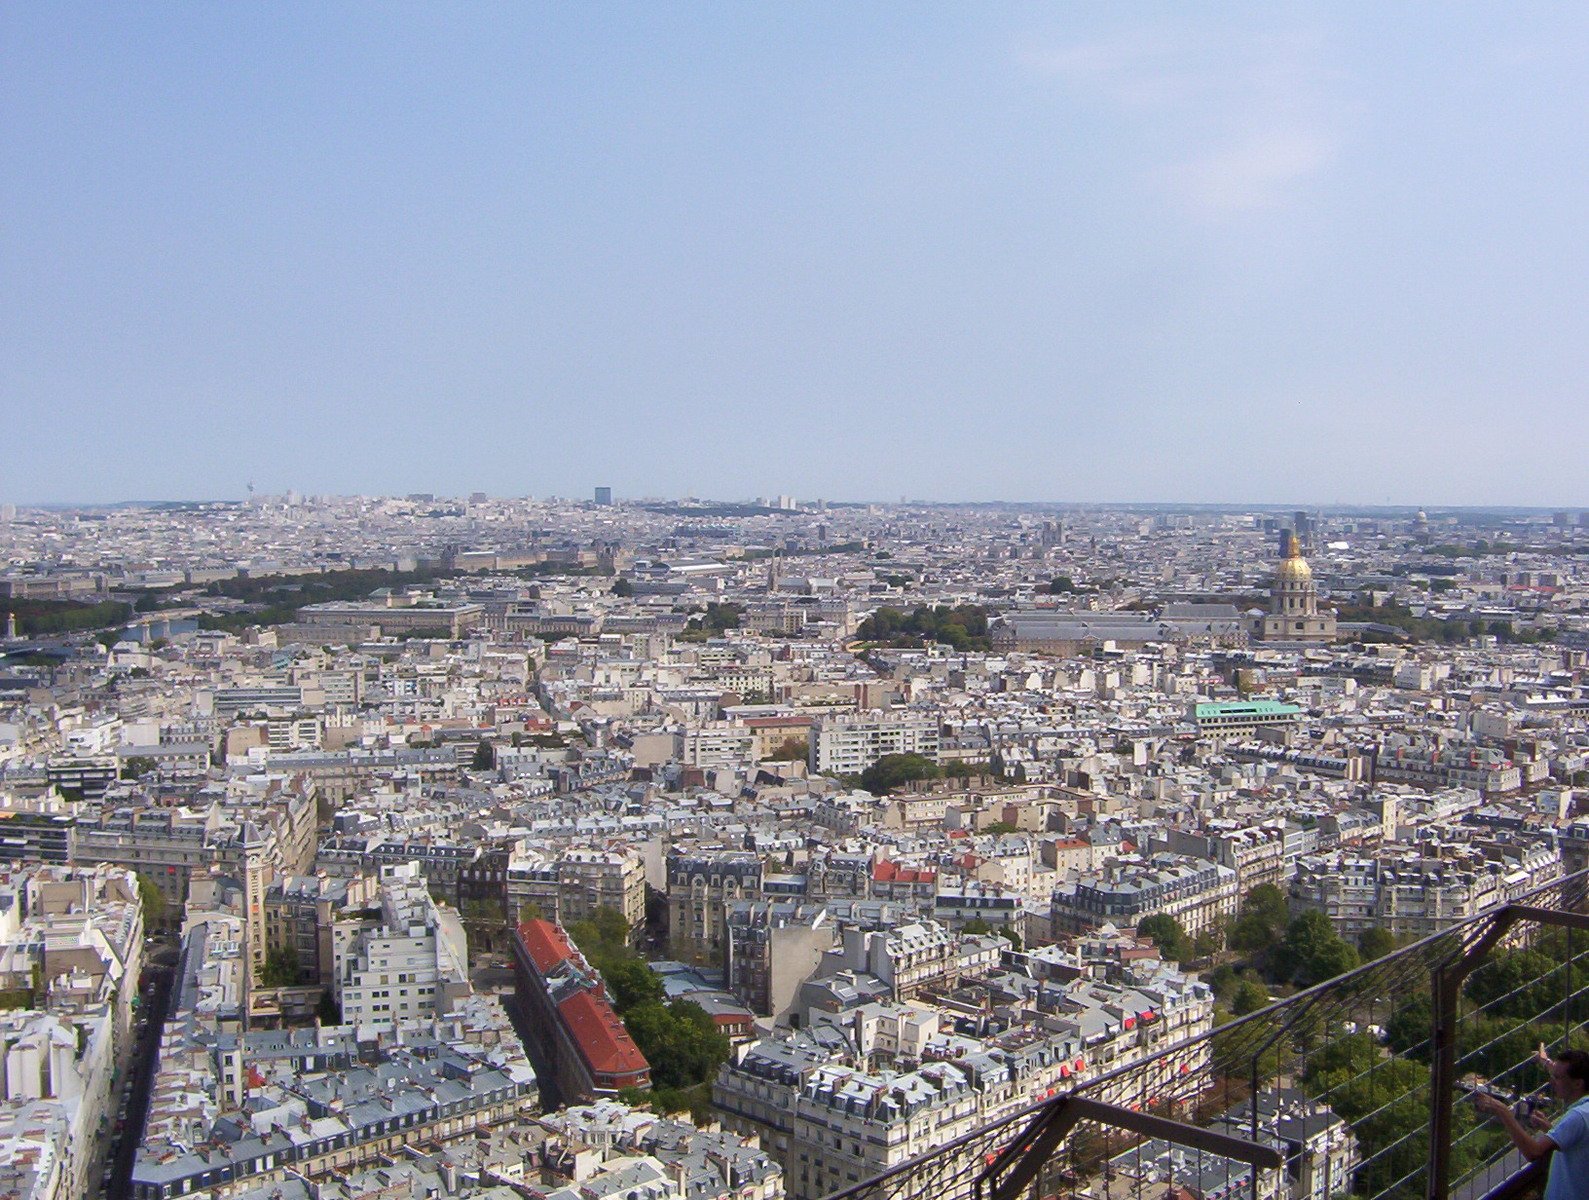 an image of a city from a height viewpoint